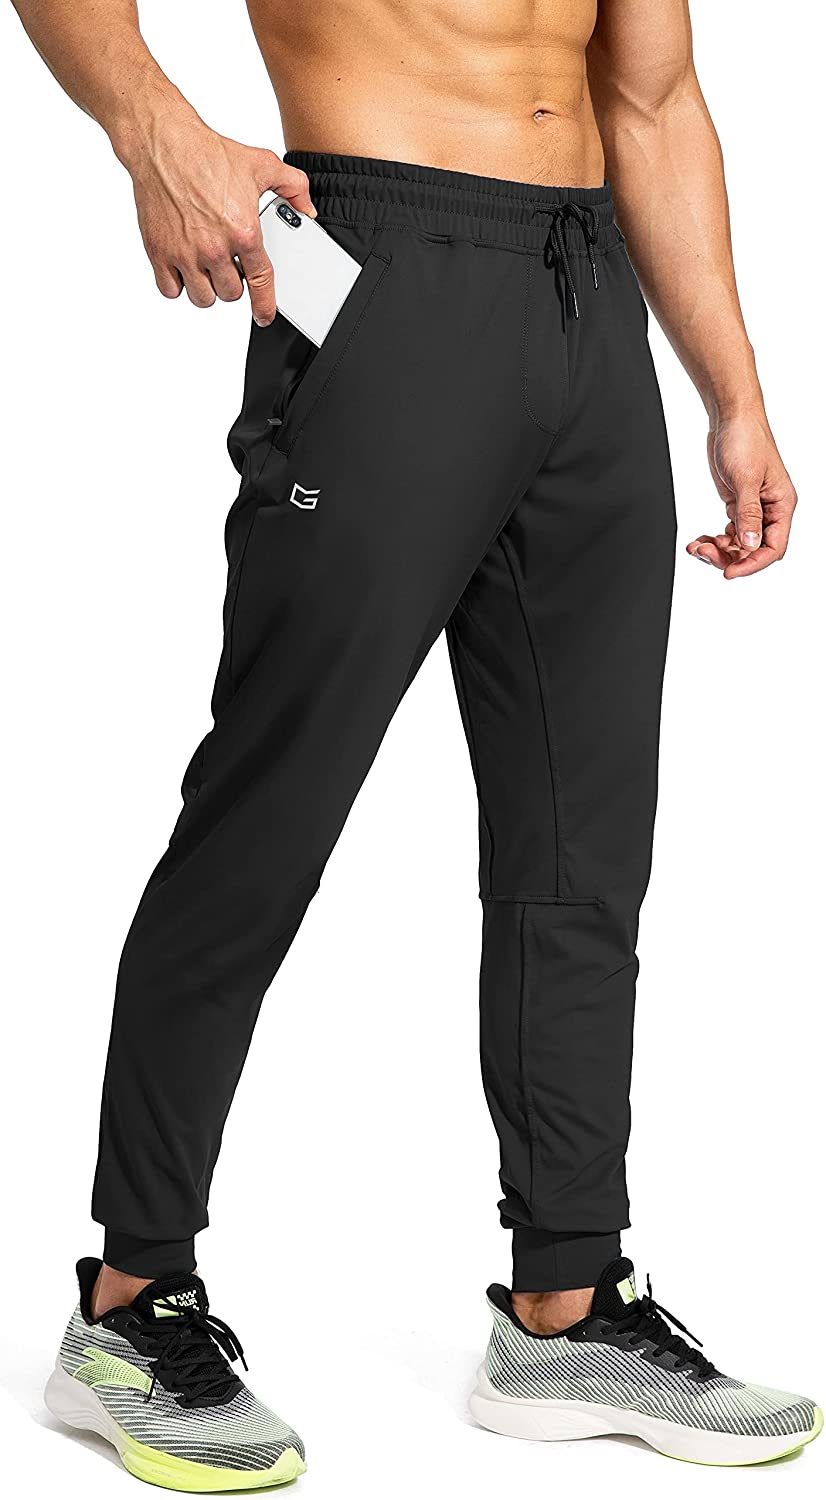 G Gradual Men's Joggers Pants with Zipper Pockets Stretch Athletic  Sweatpants for Men Workout Jogging Running